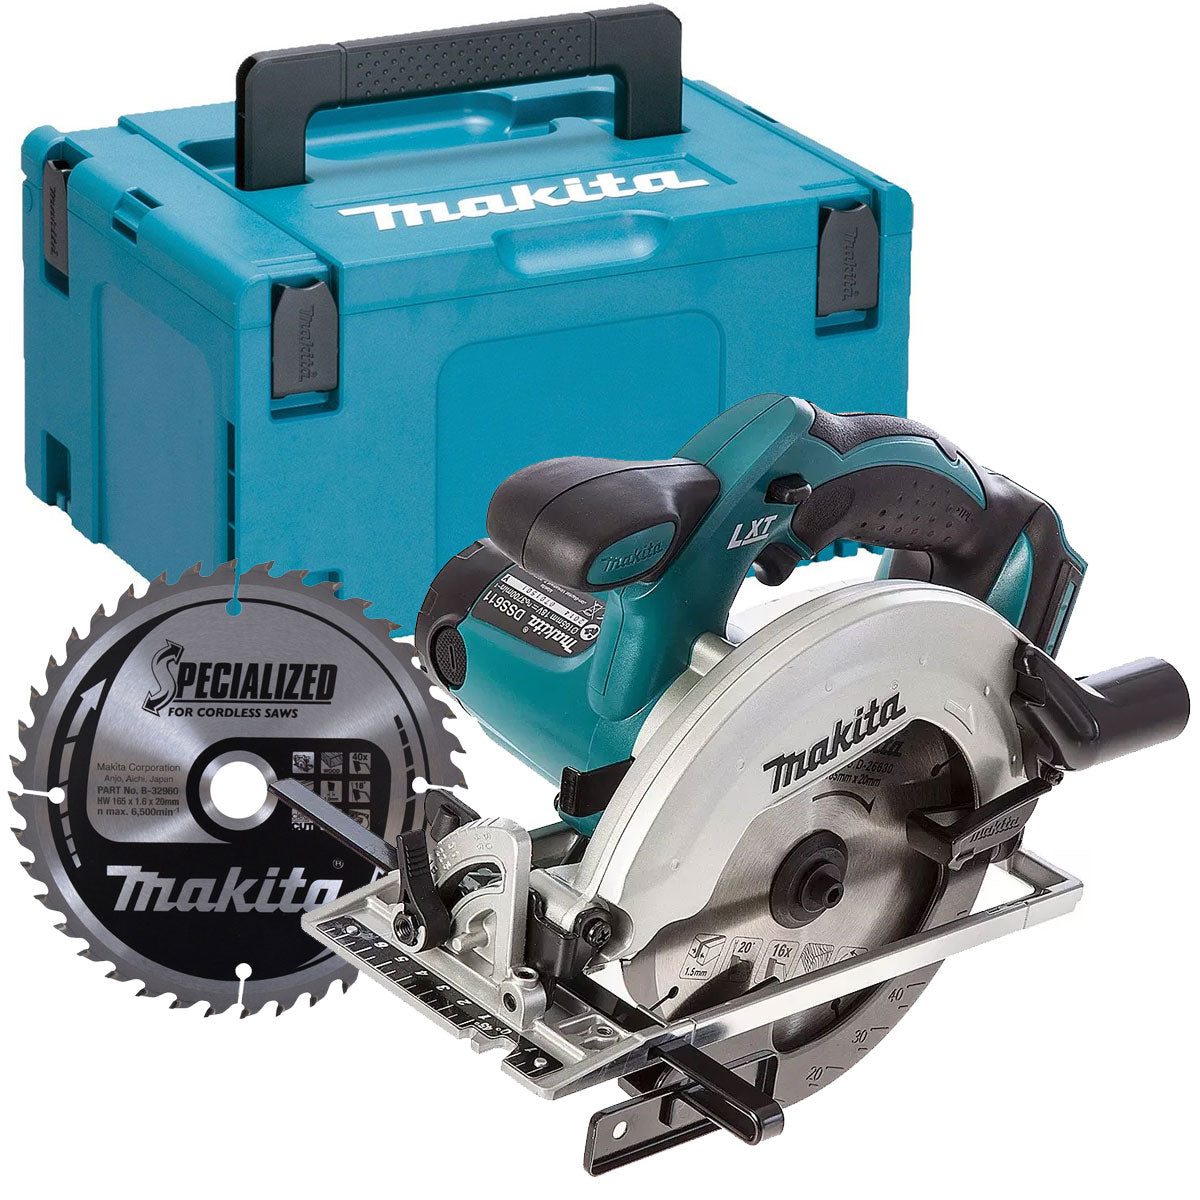 Makita DSS611Z 18V 165mm Circular Saw With Type 3 Case, Inlay & Blade